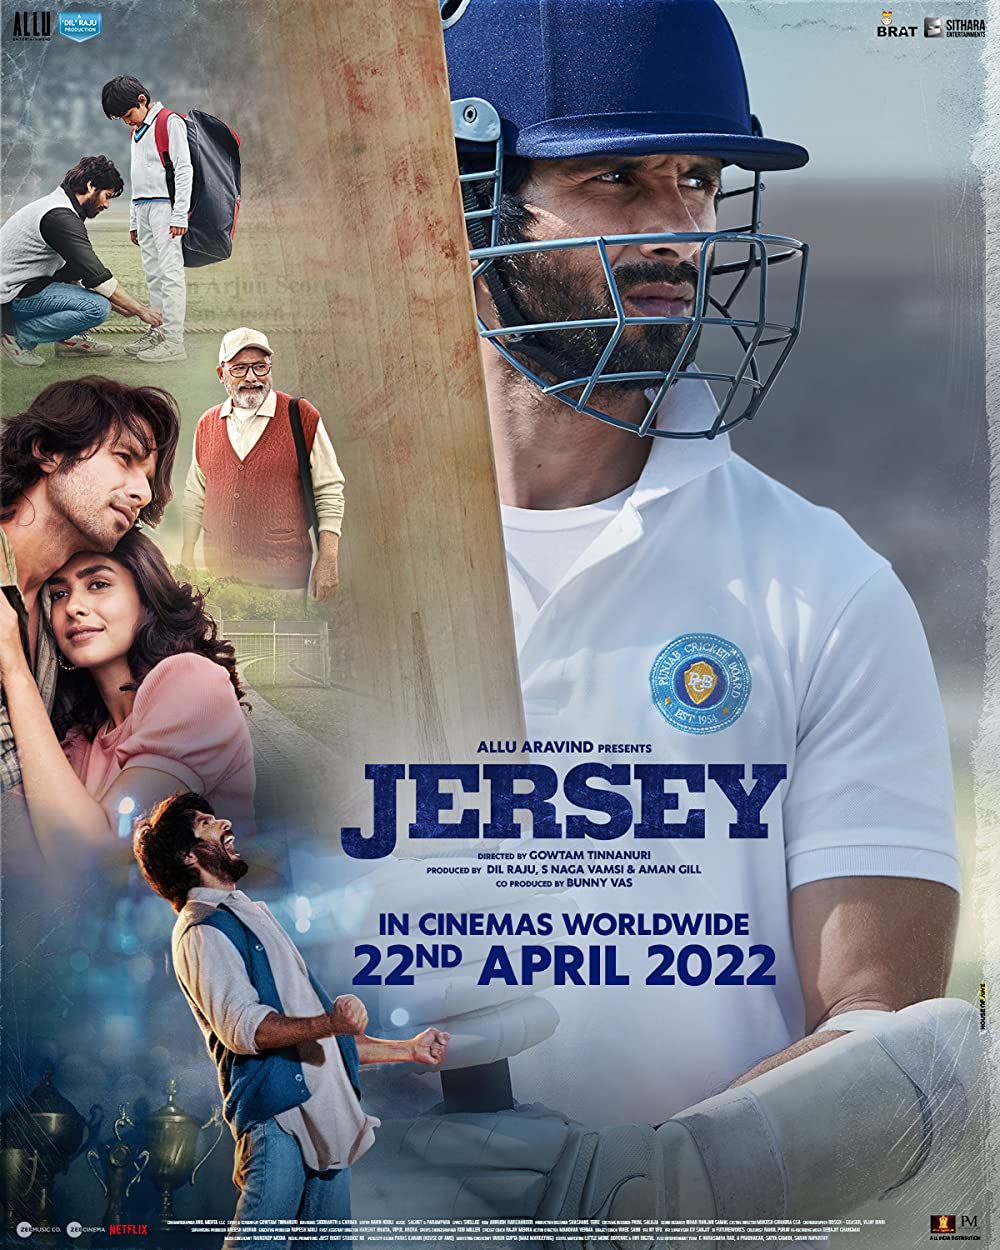 Jersey Movie (2022) Watch Online, Cast, Story, Release Date, Songs, Poster, Reviews
